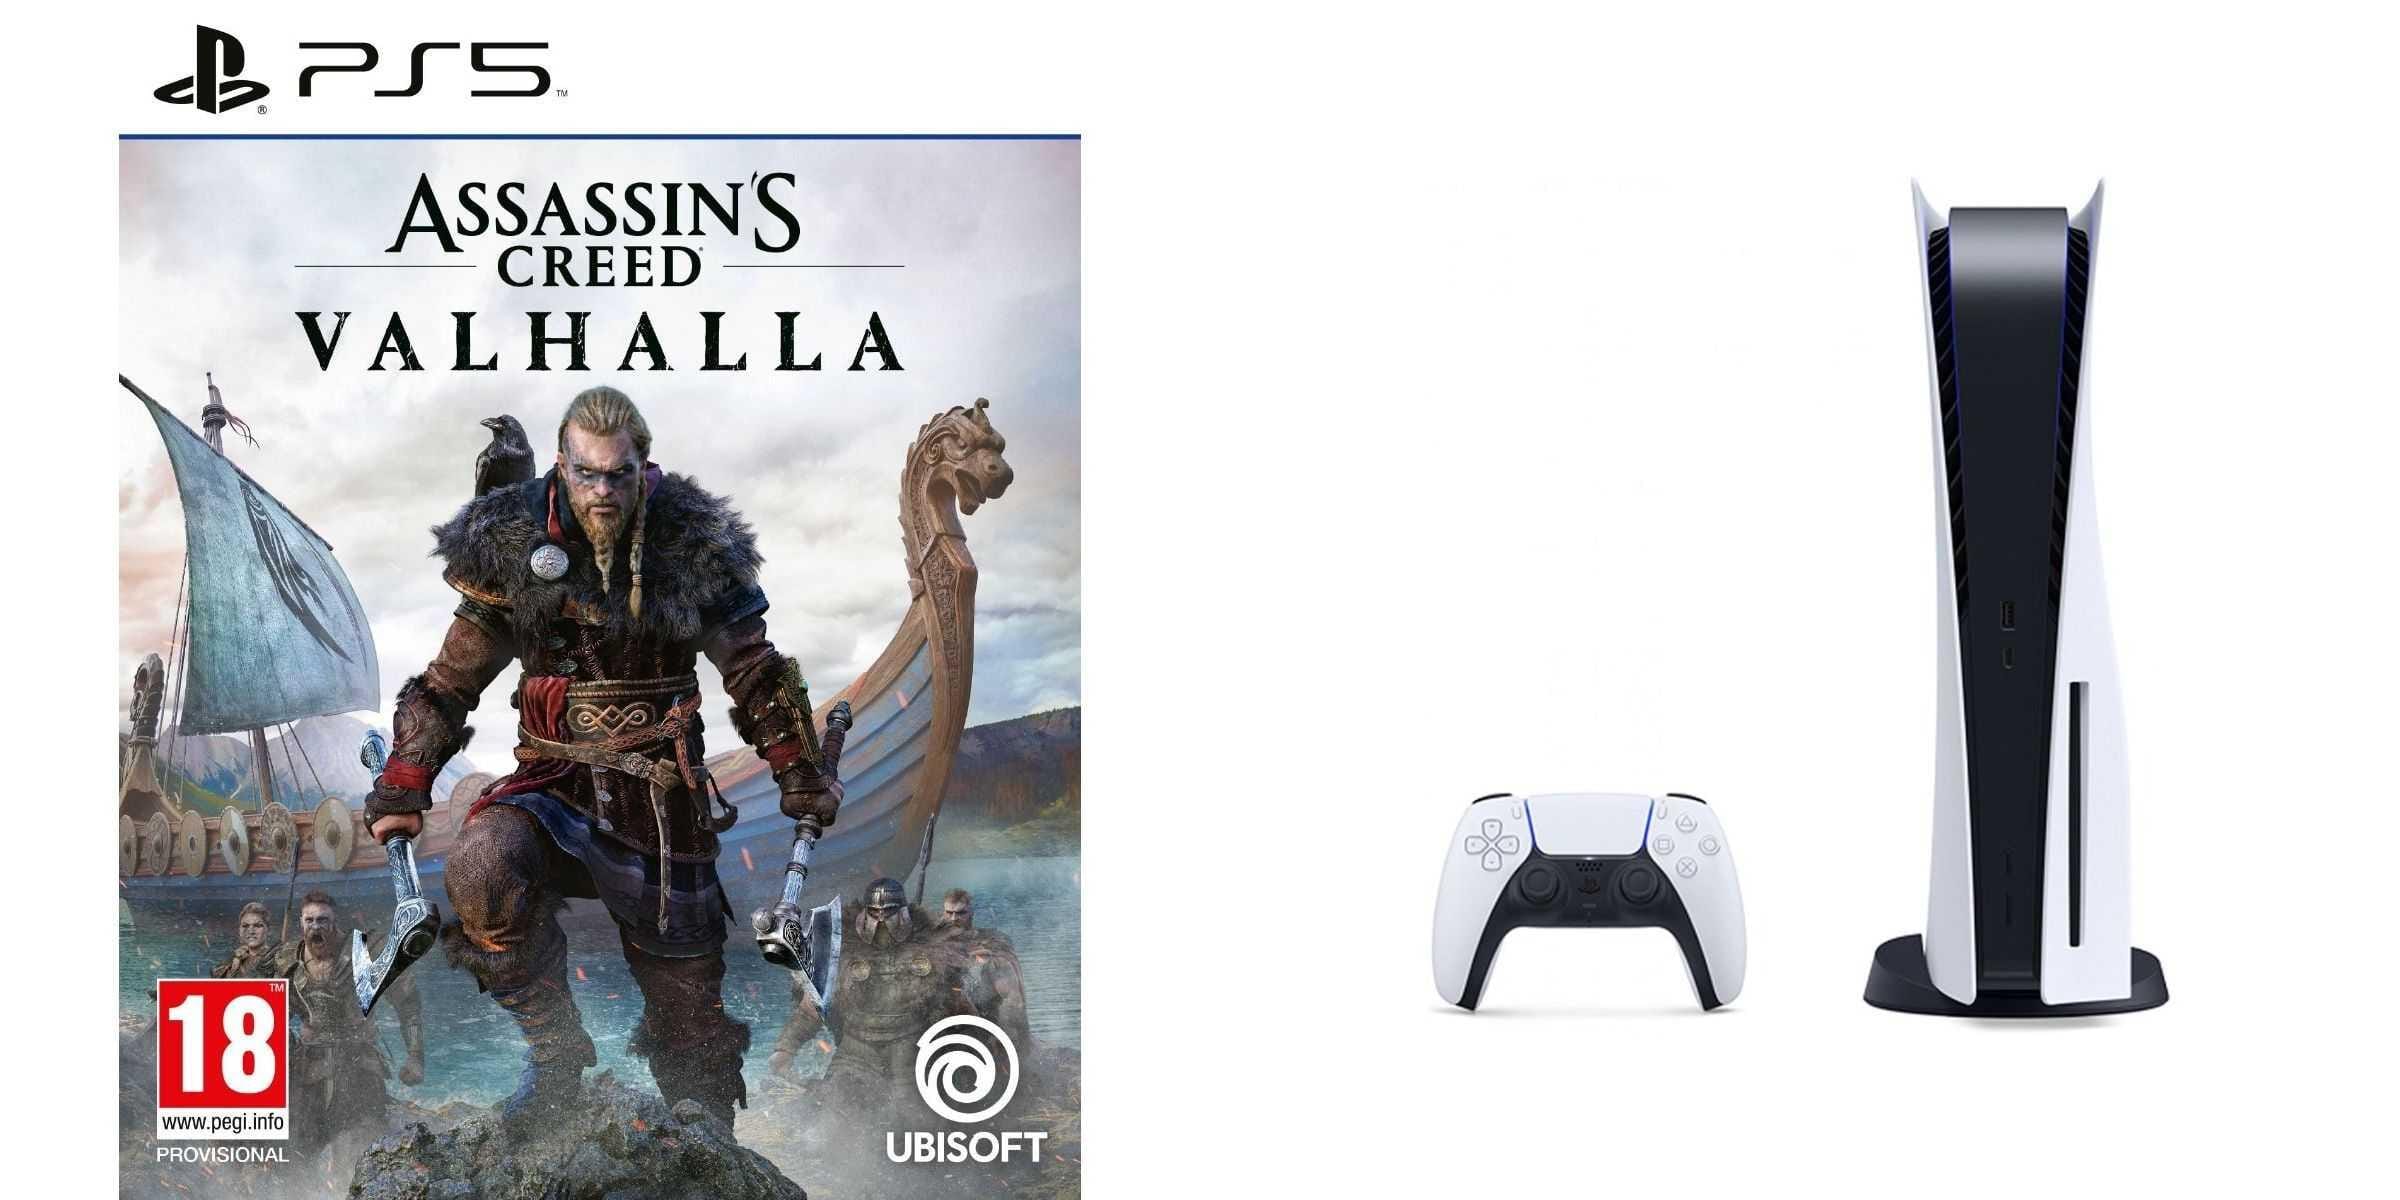 Sony PlayStation 5, 1 Wireless Controller, White - CFI-1016A01 MEE, with Assassin’s Creed Valhalla for PlayStation5